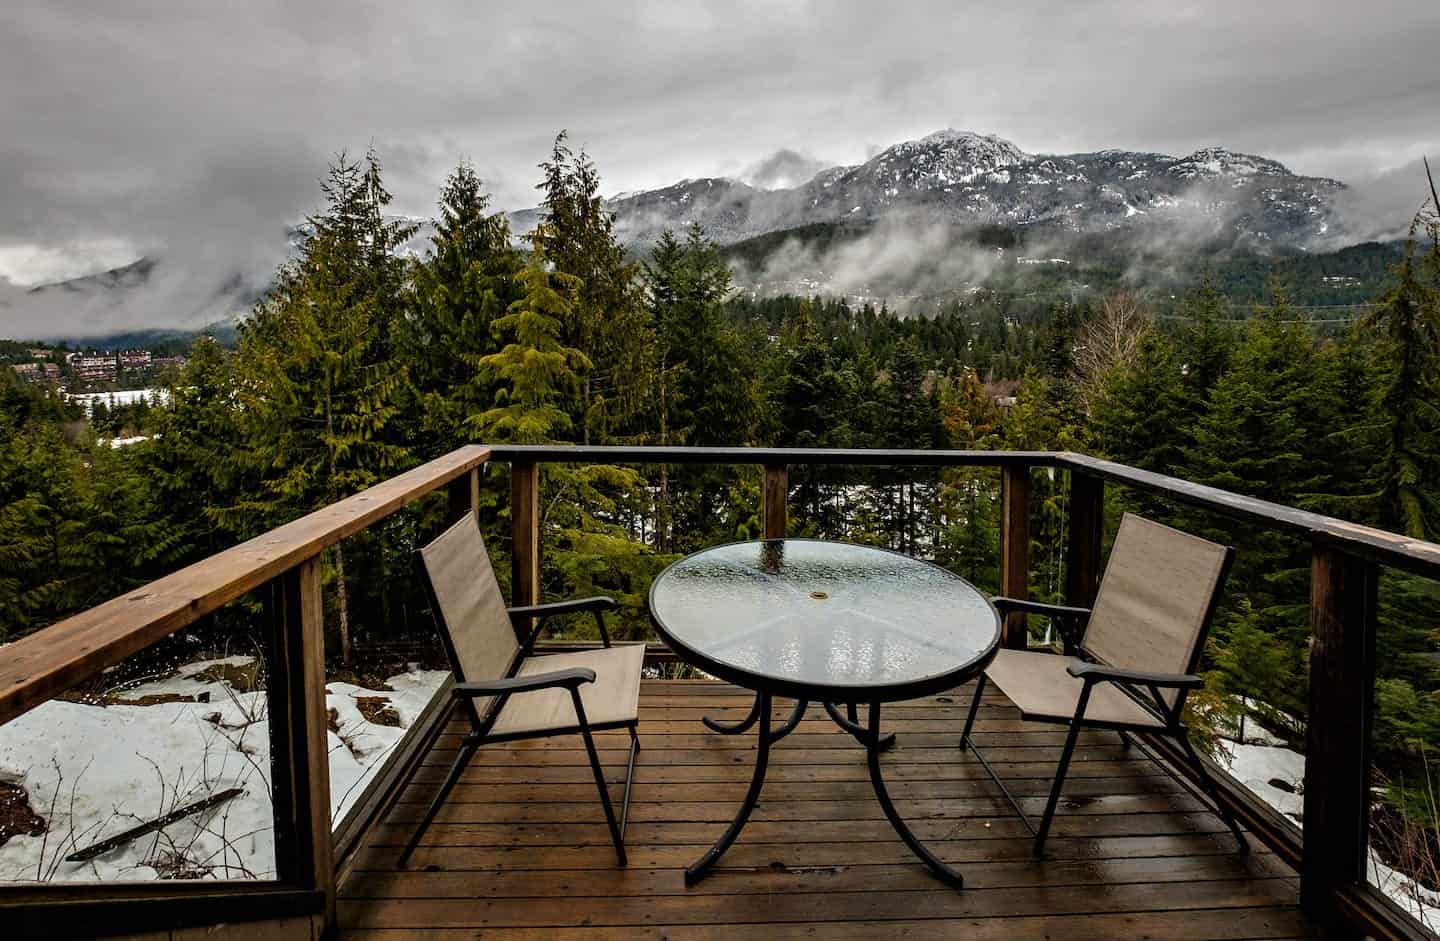 Image of Airbnb rental in Whistler, British Columbia